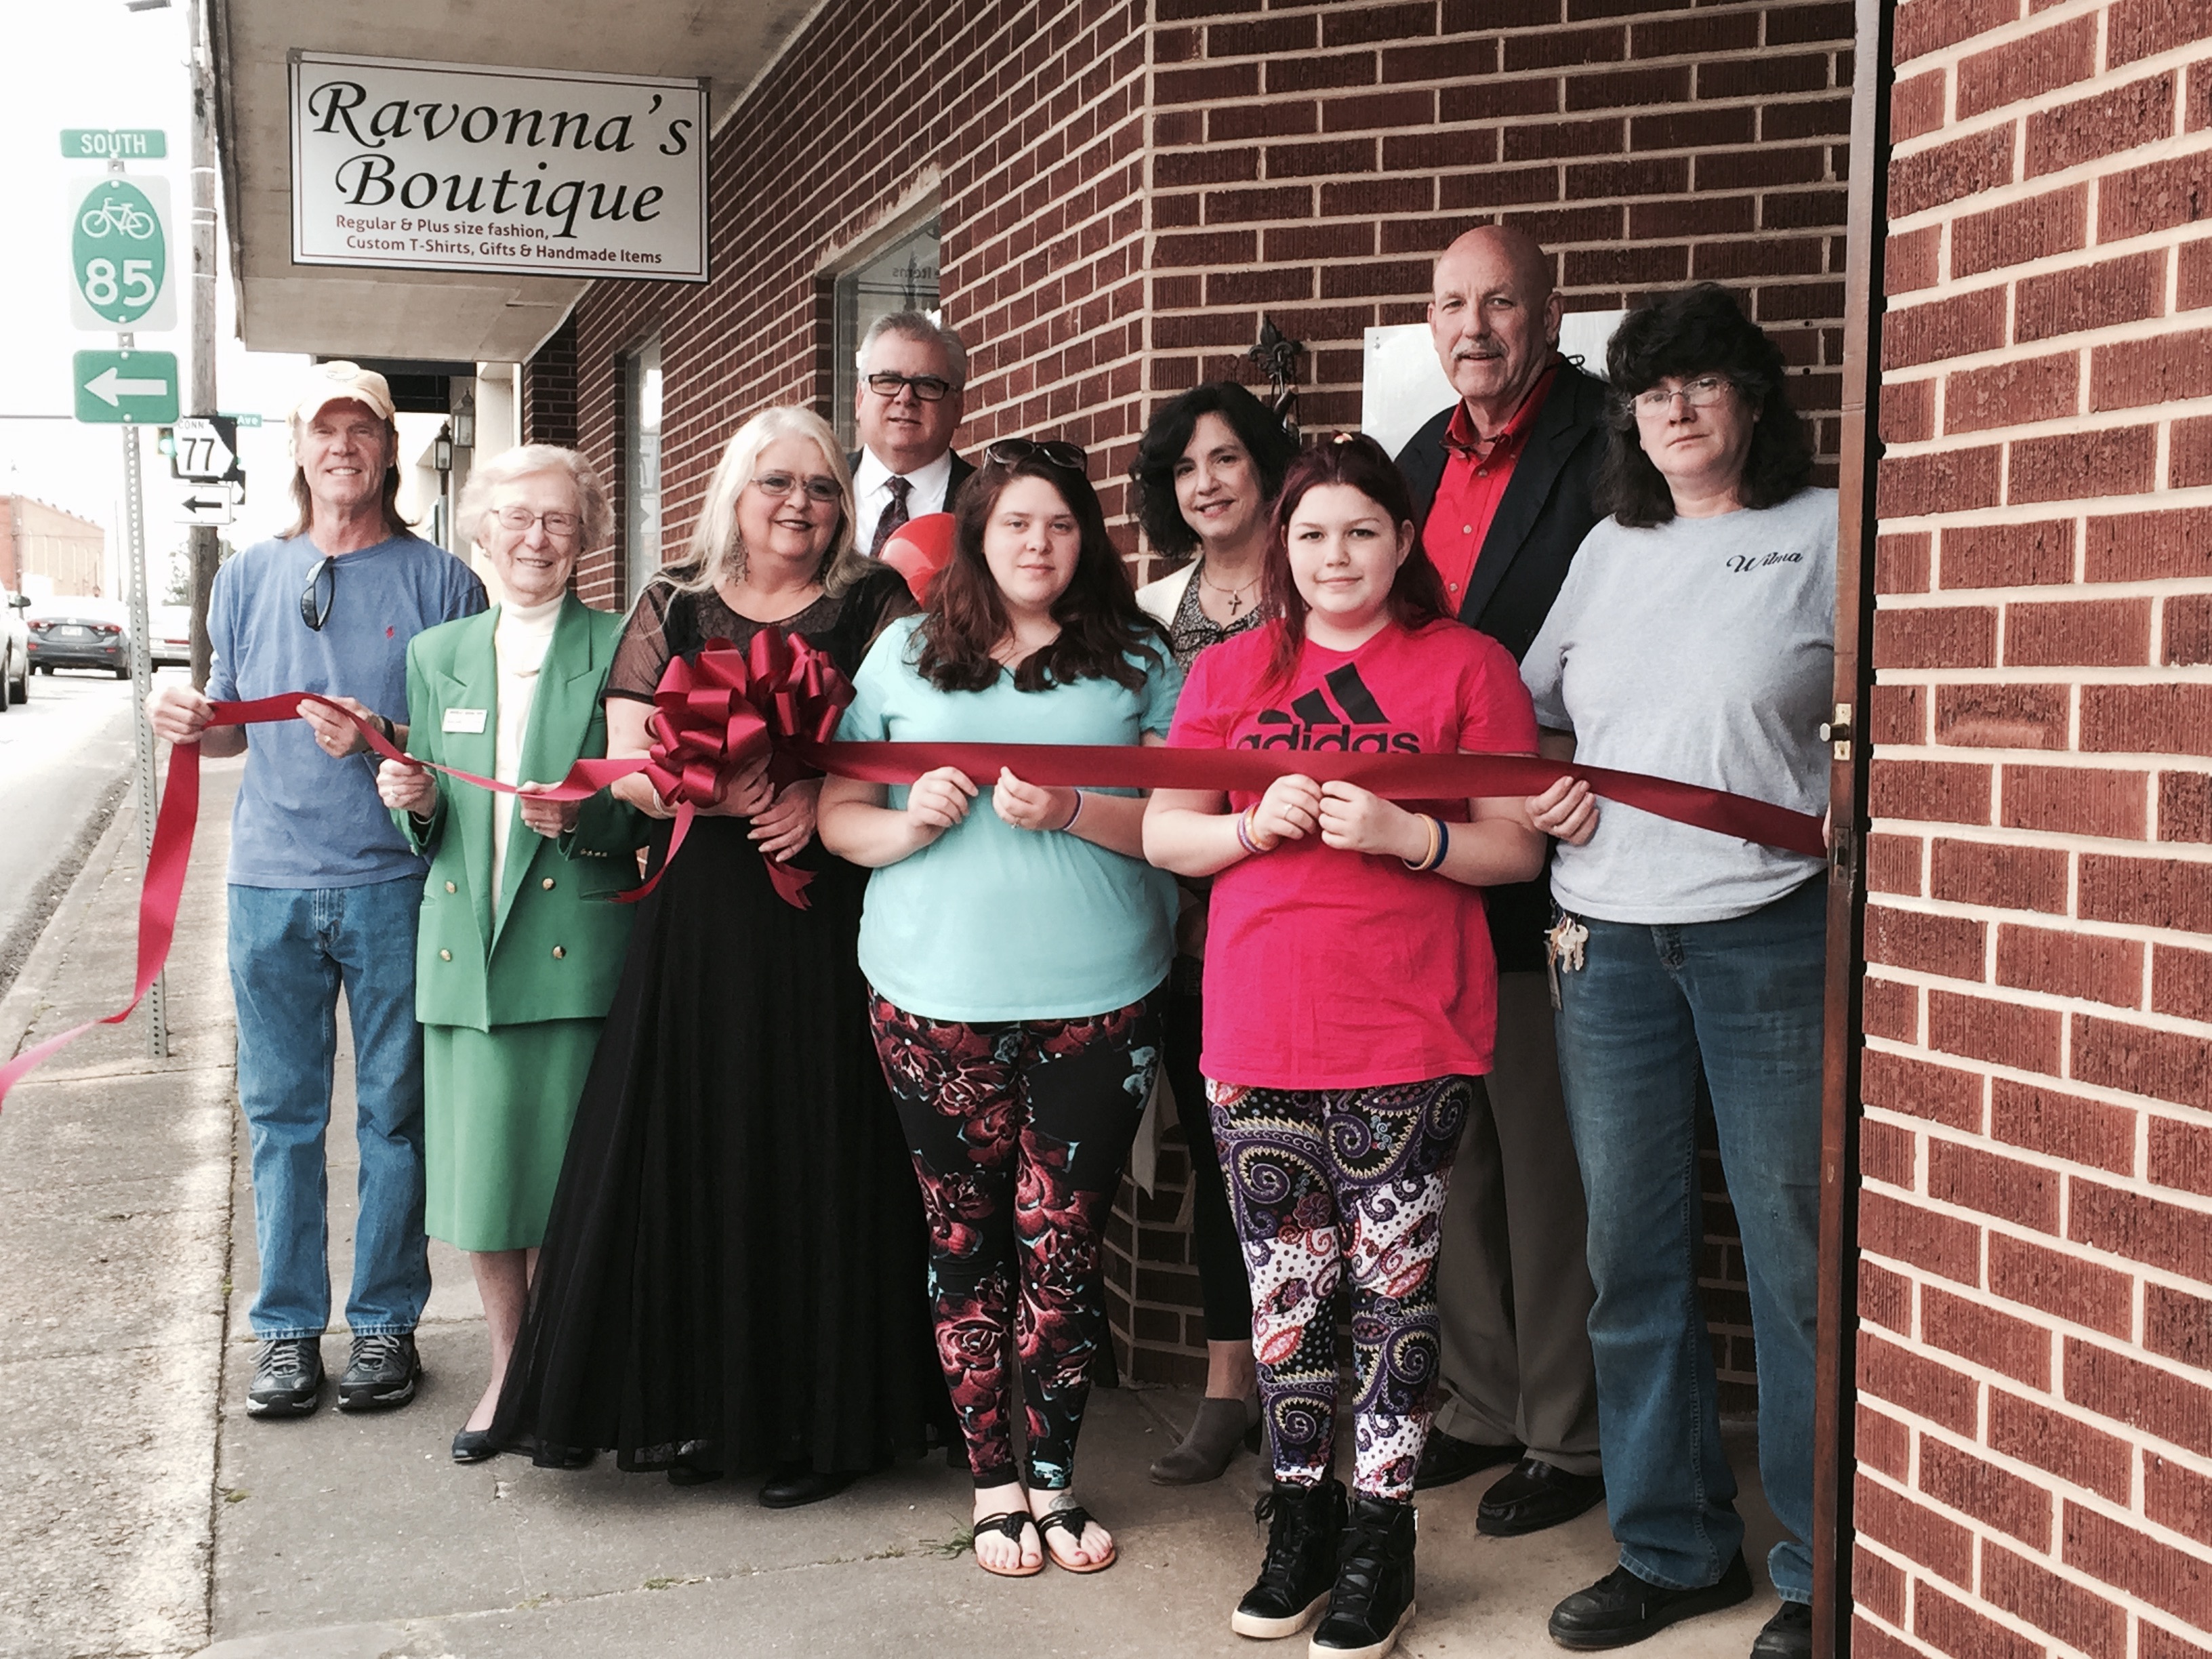 Lavonia Chamber holds ribbon cutting for Ravonna's - 92.1 WLHR